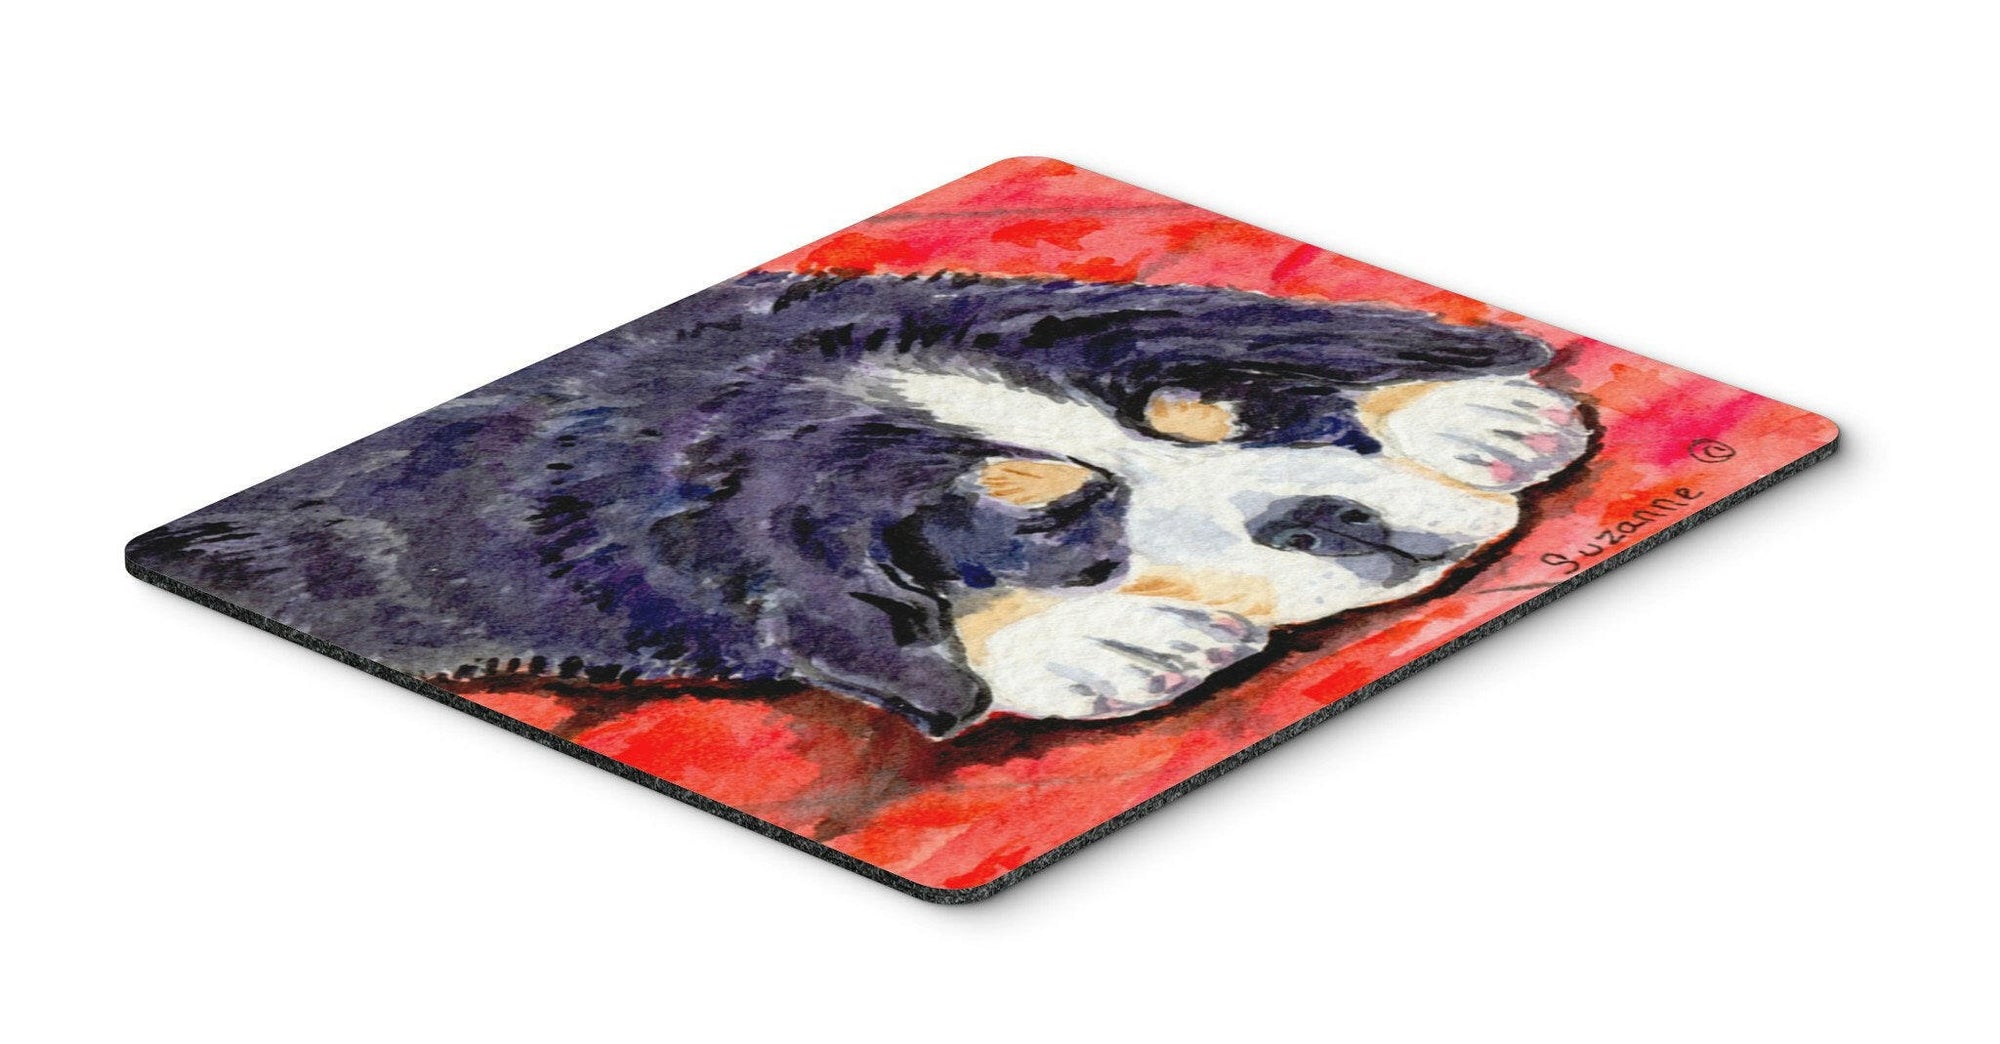 Bernese Mountain Dog Mouse pad, hot pad, or trivet by Caroline's Treasures